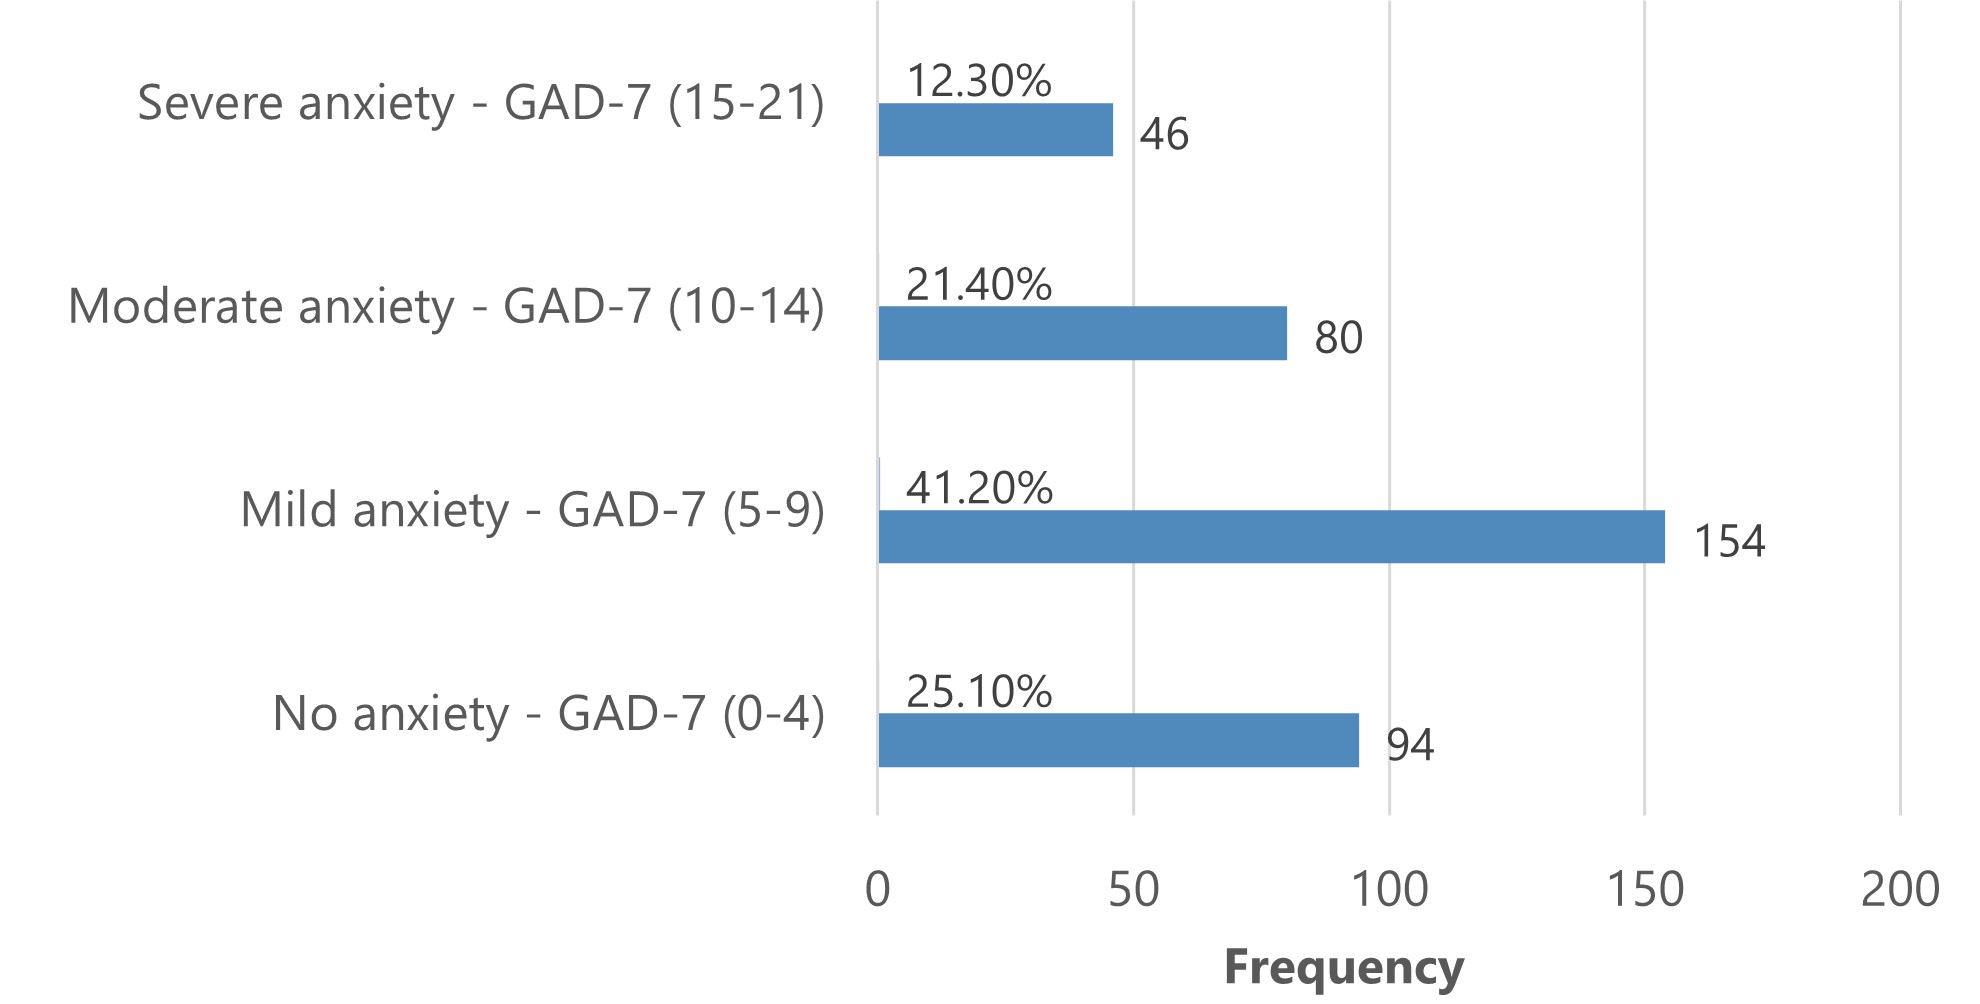 The image is a horizontal bar graph with four bars, each representing a category of anxiety severity according to the Generalized Anxiety Disorder-7 (GAD-7) scale. The categories, listed from the top bar down, are 'Severe anxiety' (scores 15-21), 'Moderate anxiety' (scores 10-14), 'Mild anxiety' (scores 5-9), and 'No anxiety' (scores 0-4). Each bar's length corresponds to the number of individuals in that category, with frequencies noted on the graph. The 'Mild anxiety' category has the longest bar, indicating the highest frequency, followed by 'No anxiety', 'Moderate anxiety', and 'Severe anxiety', respectively. The percentages shown above each bar denote the proportion of individuals within each category, with 'Mild anxiety' having the highest percentage of 41.20% and 'Severe anxiety' the lowest at 12.30%. The graph is a visual representation of the prevalence of anxiety at different levels within the surveyed group.